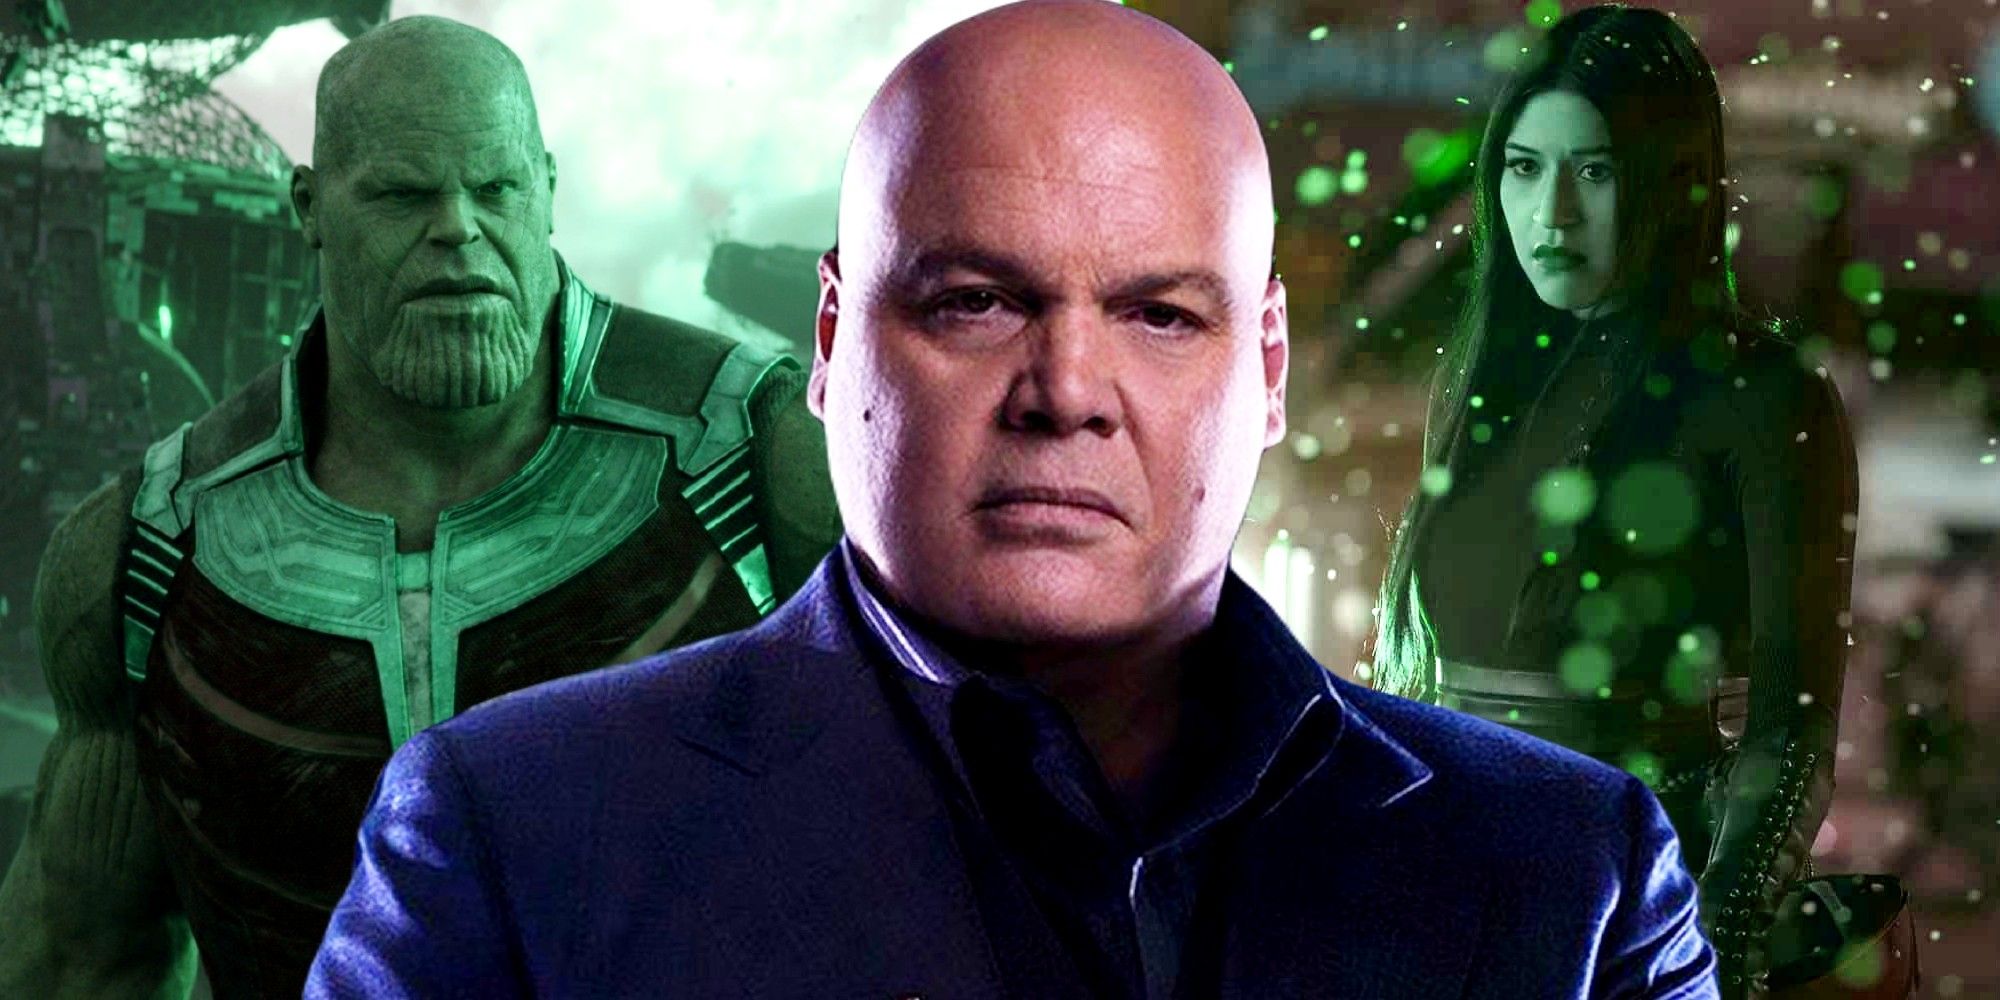 Vincent D'onofrio's Kingpin stands in the foreground of a blended image with Josh Brolin's Thanos and Alaqua Cox's Echo in the background in a green hue.